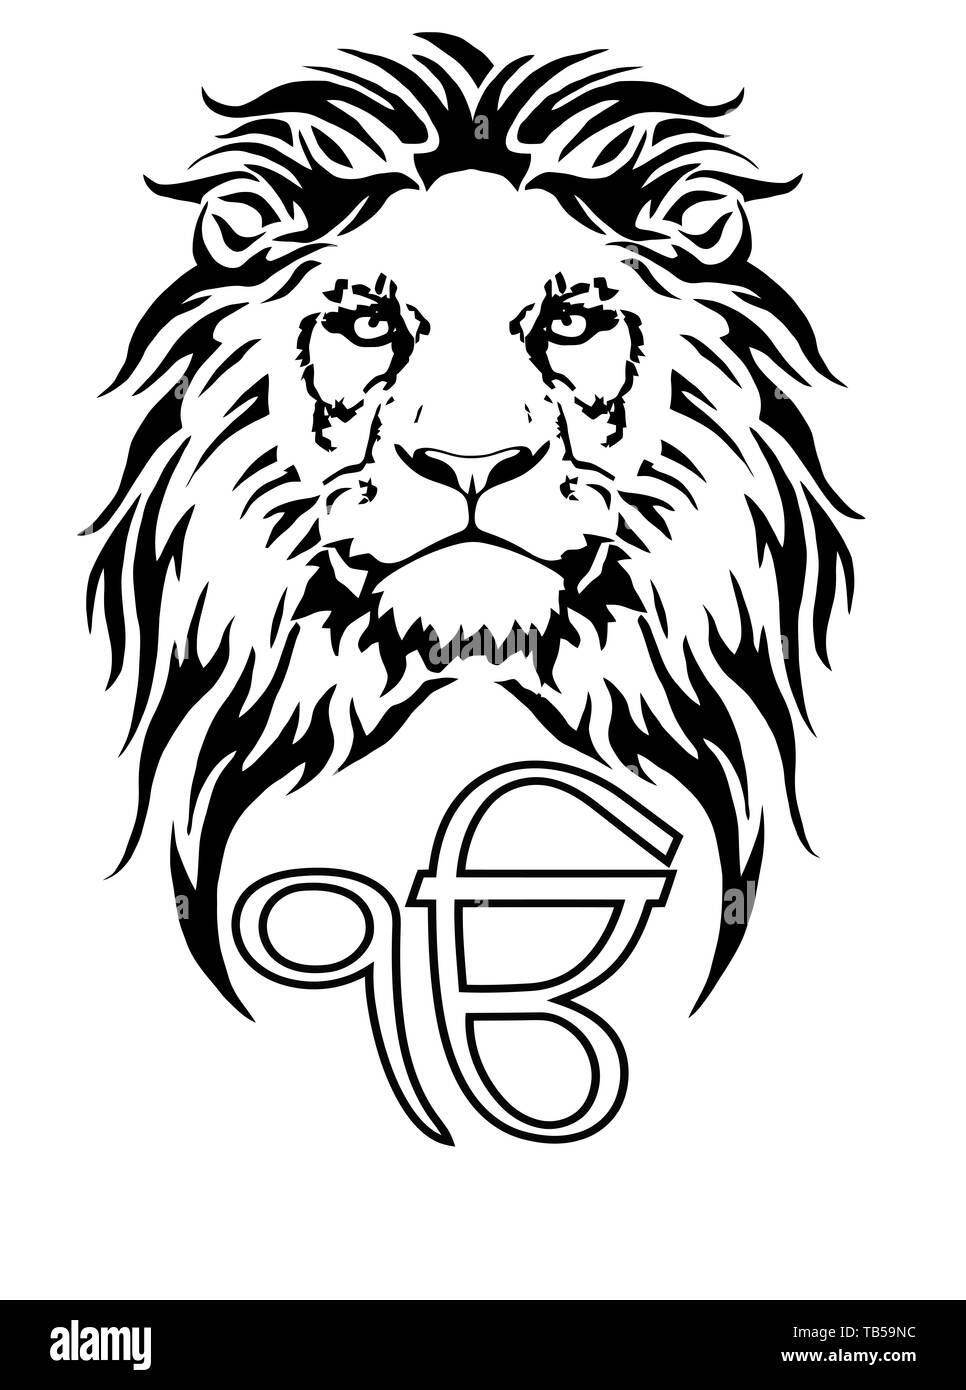 The Lion and the most significant symbol of Sikhism - Sign Ek Onkar, drawing for tattoo, on a white background Stock Photo